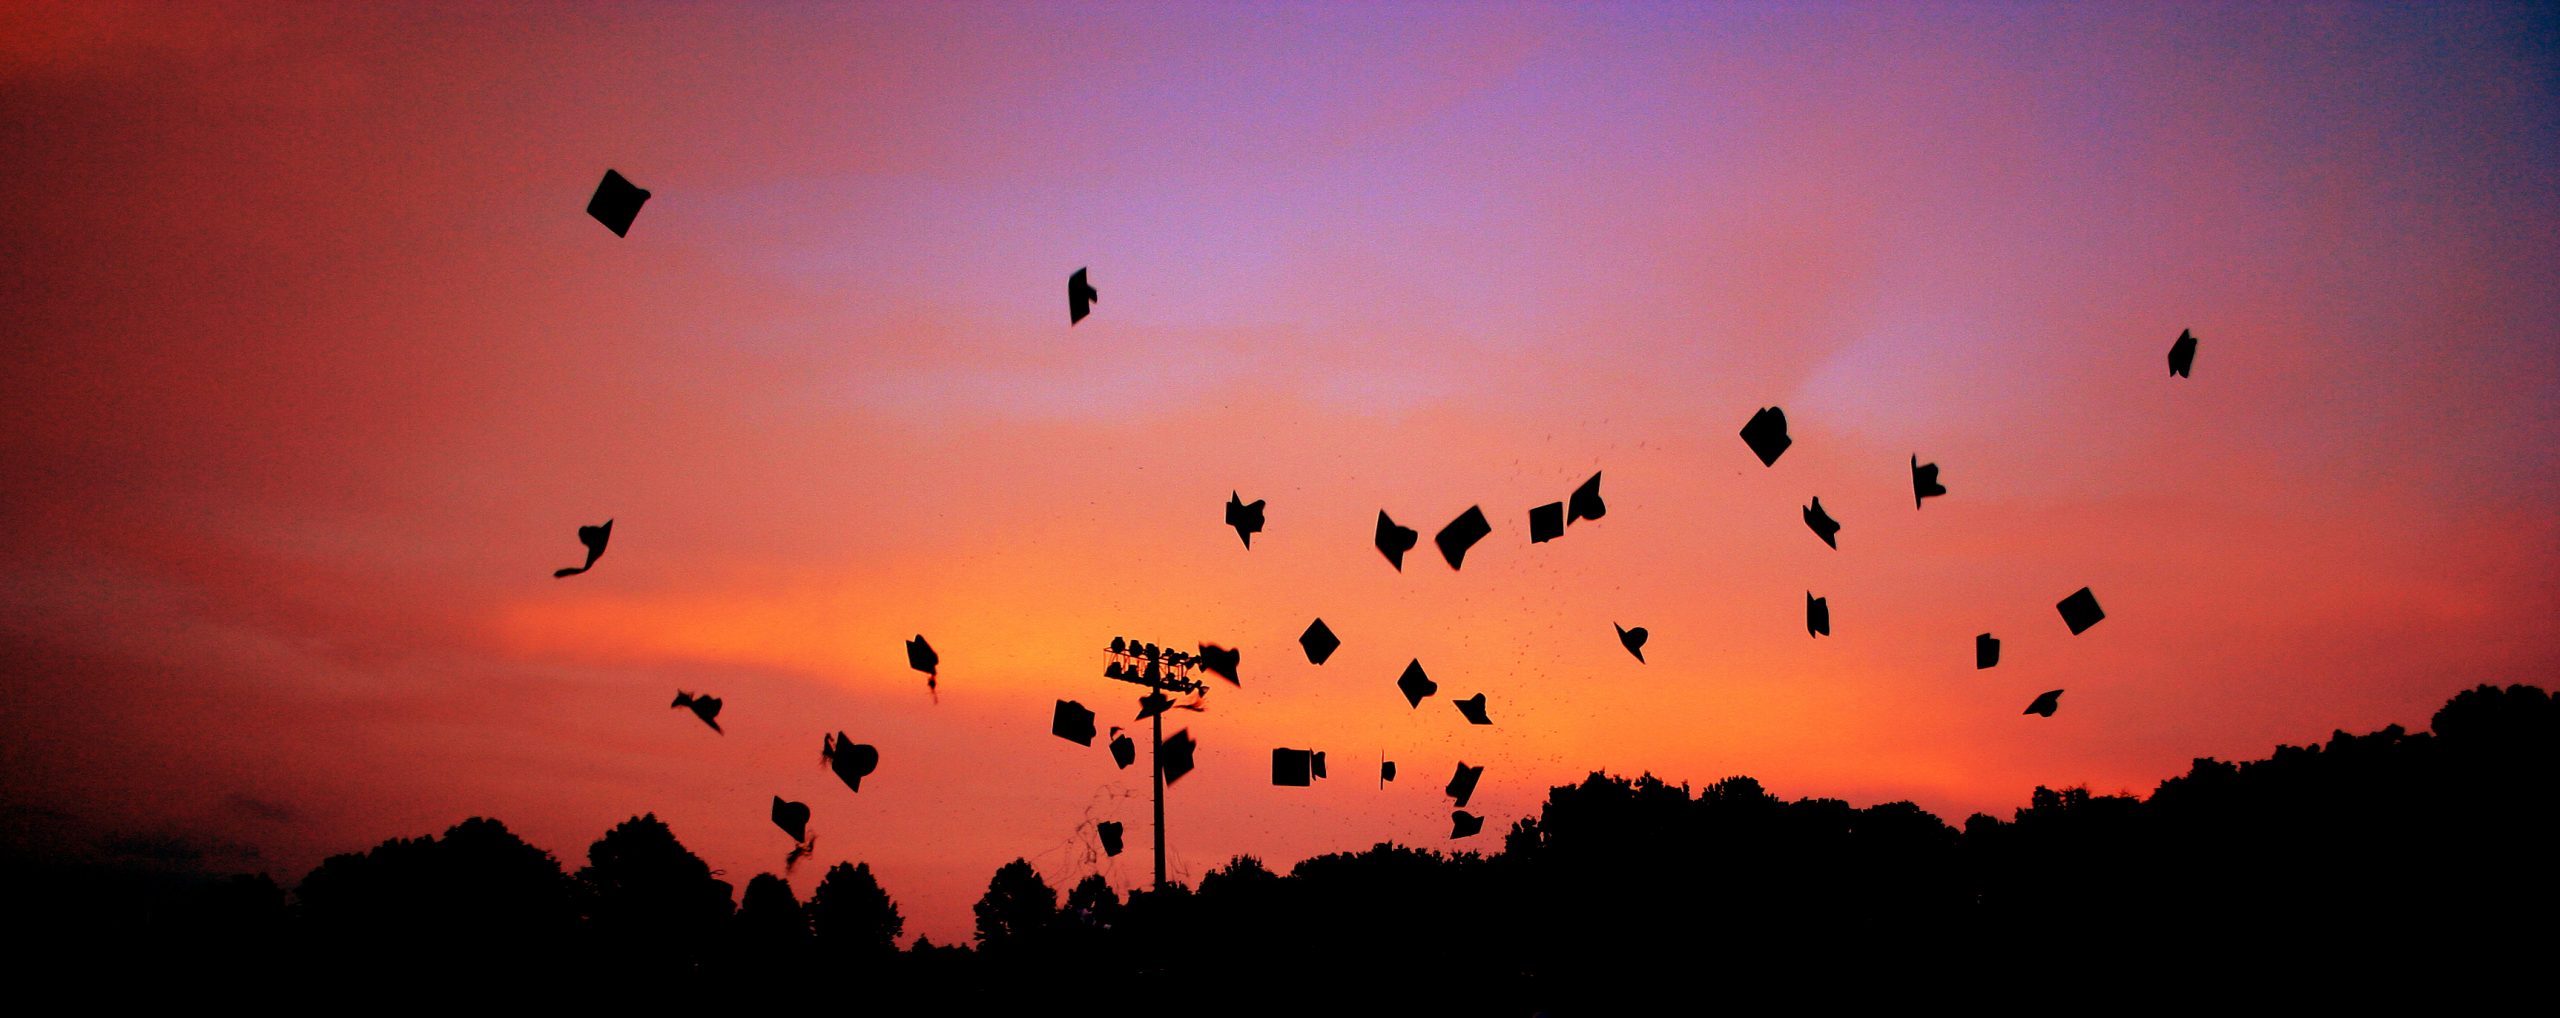 black graduation caps being thrown in the sunset sky